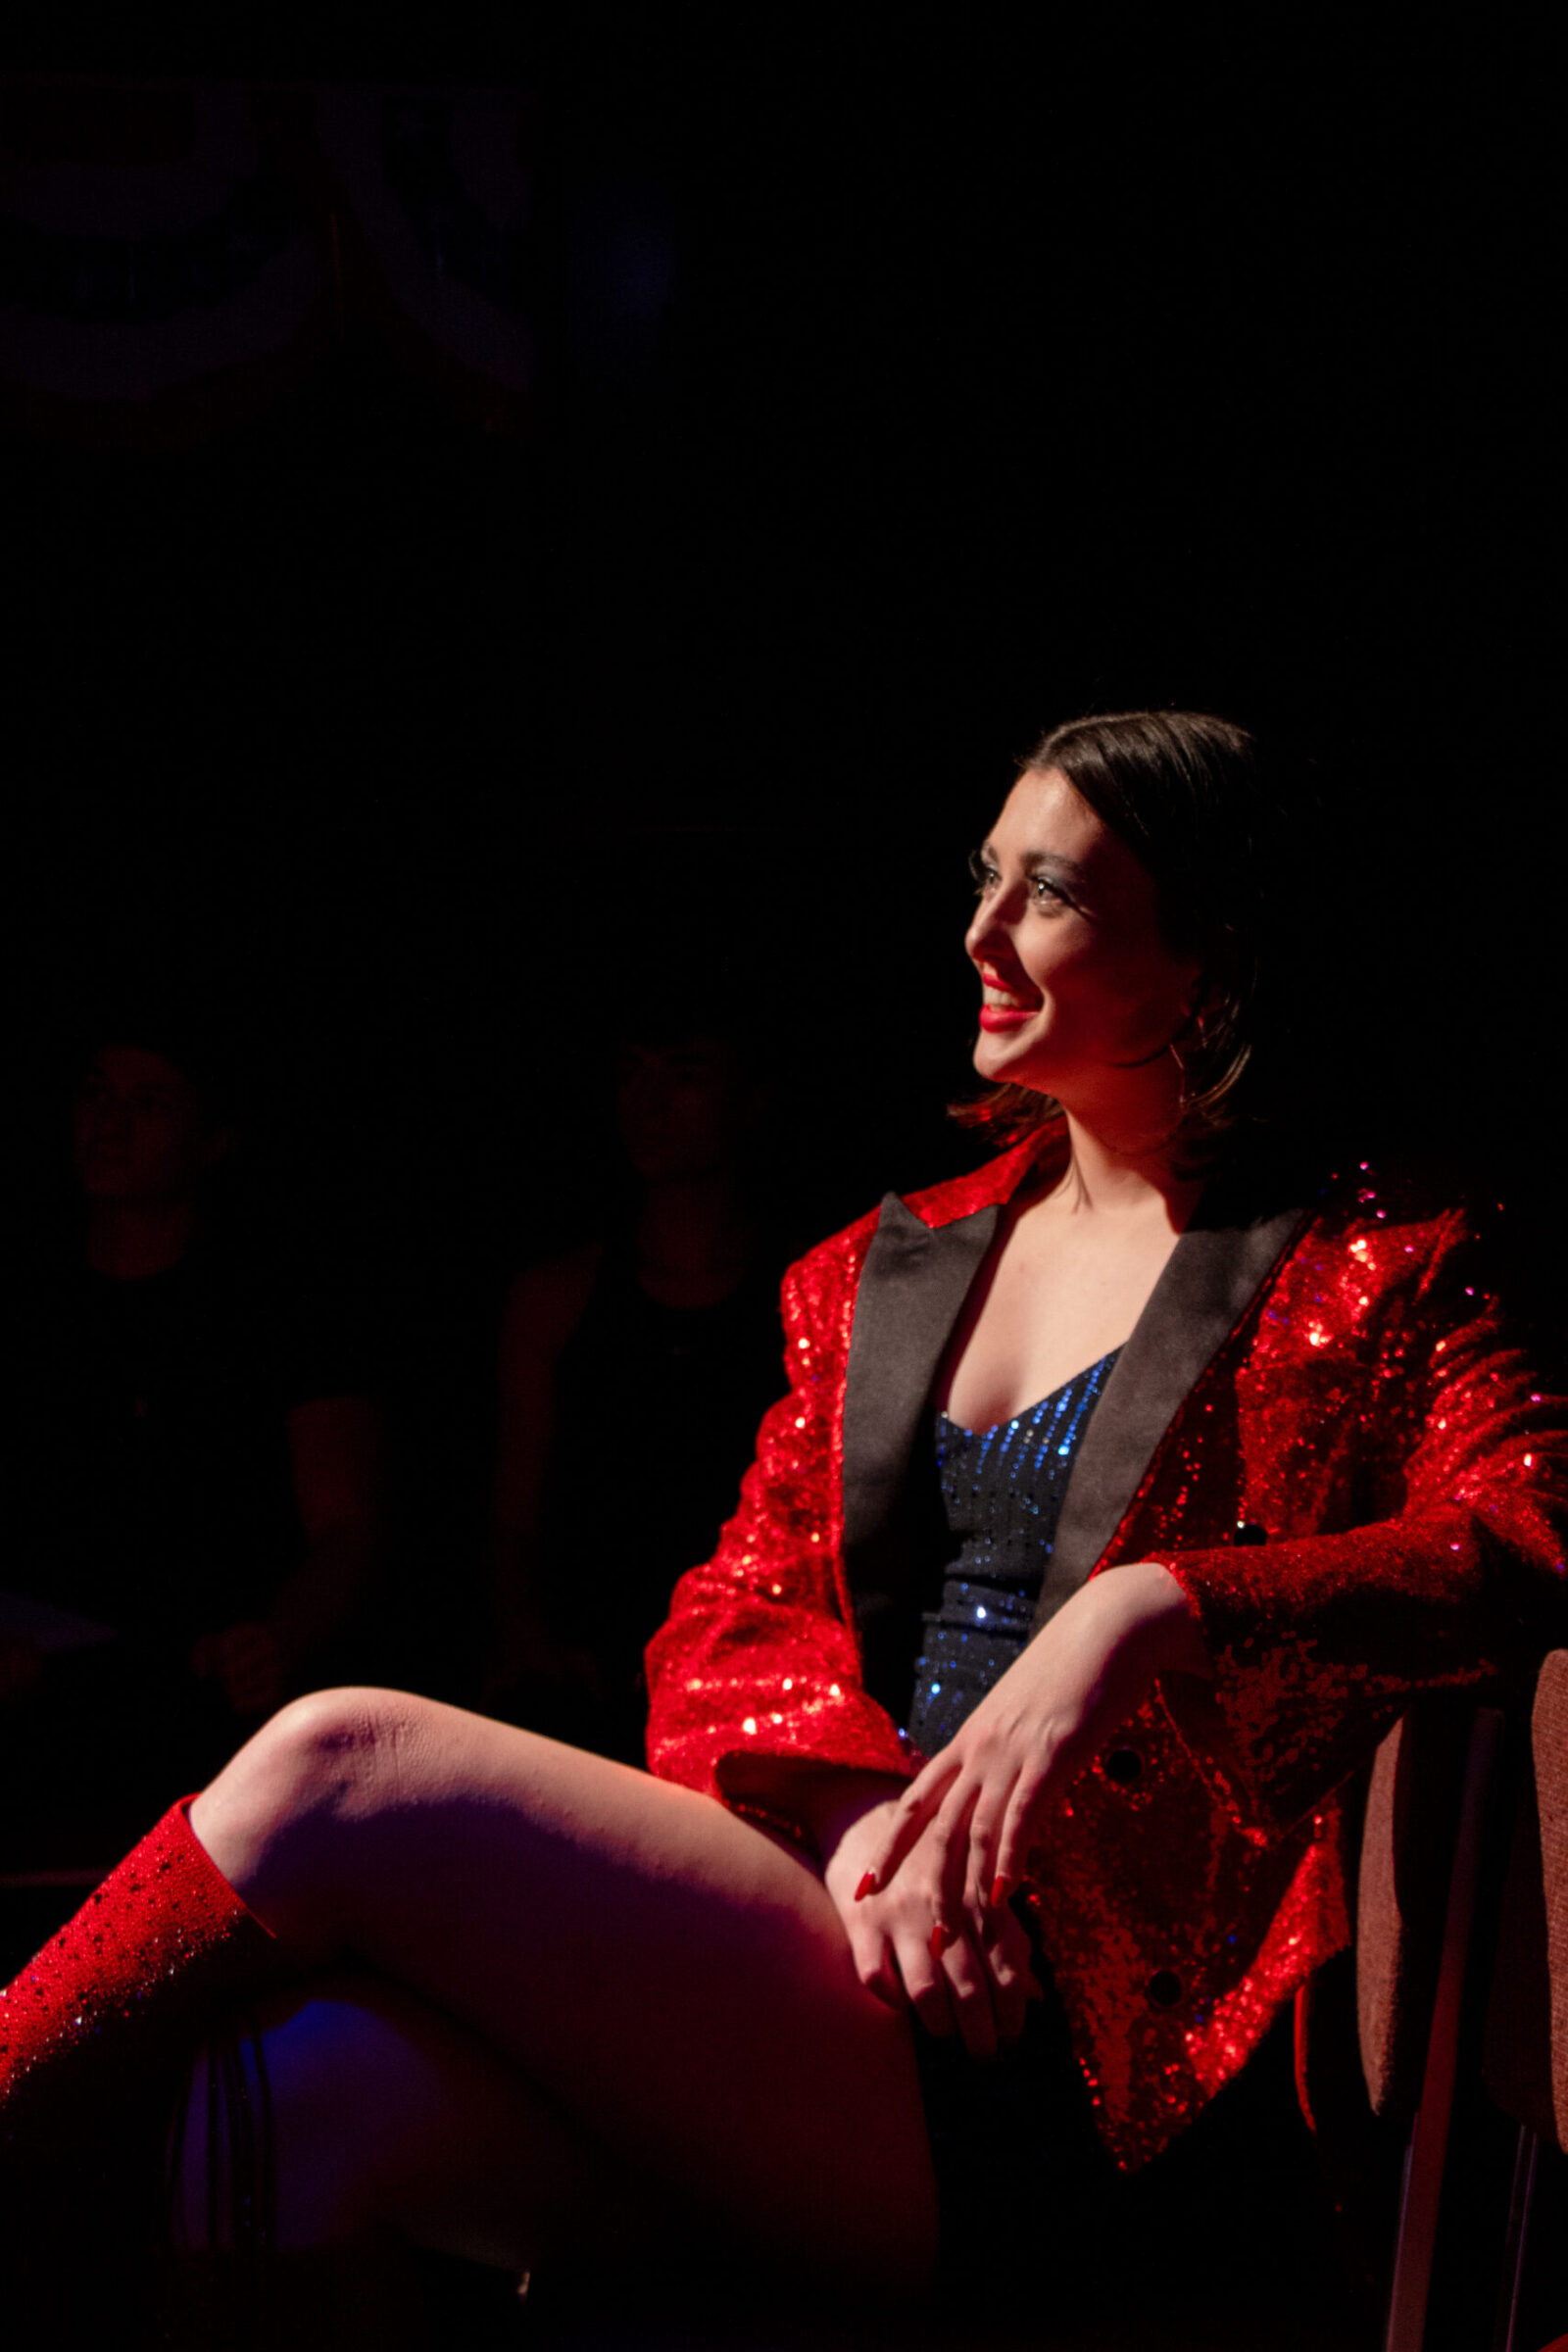 Gracie sits in a chair with legs crossed wearing a sparkly red suit jacket and boots